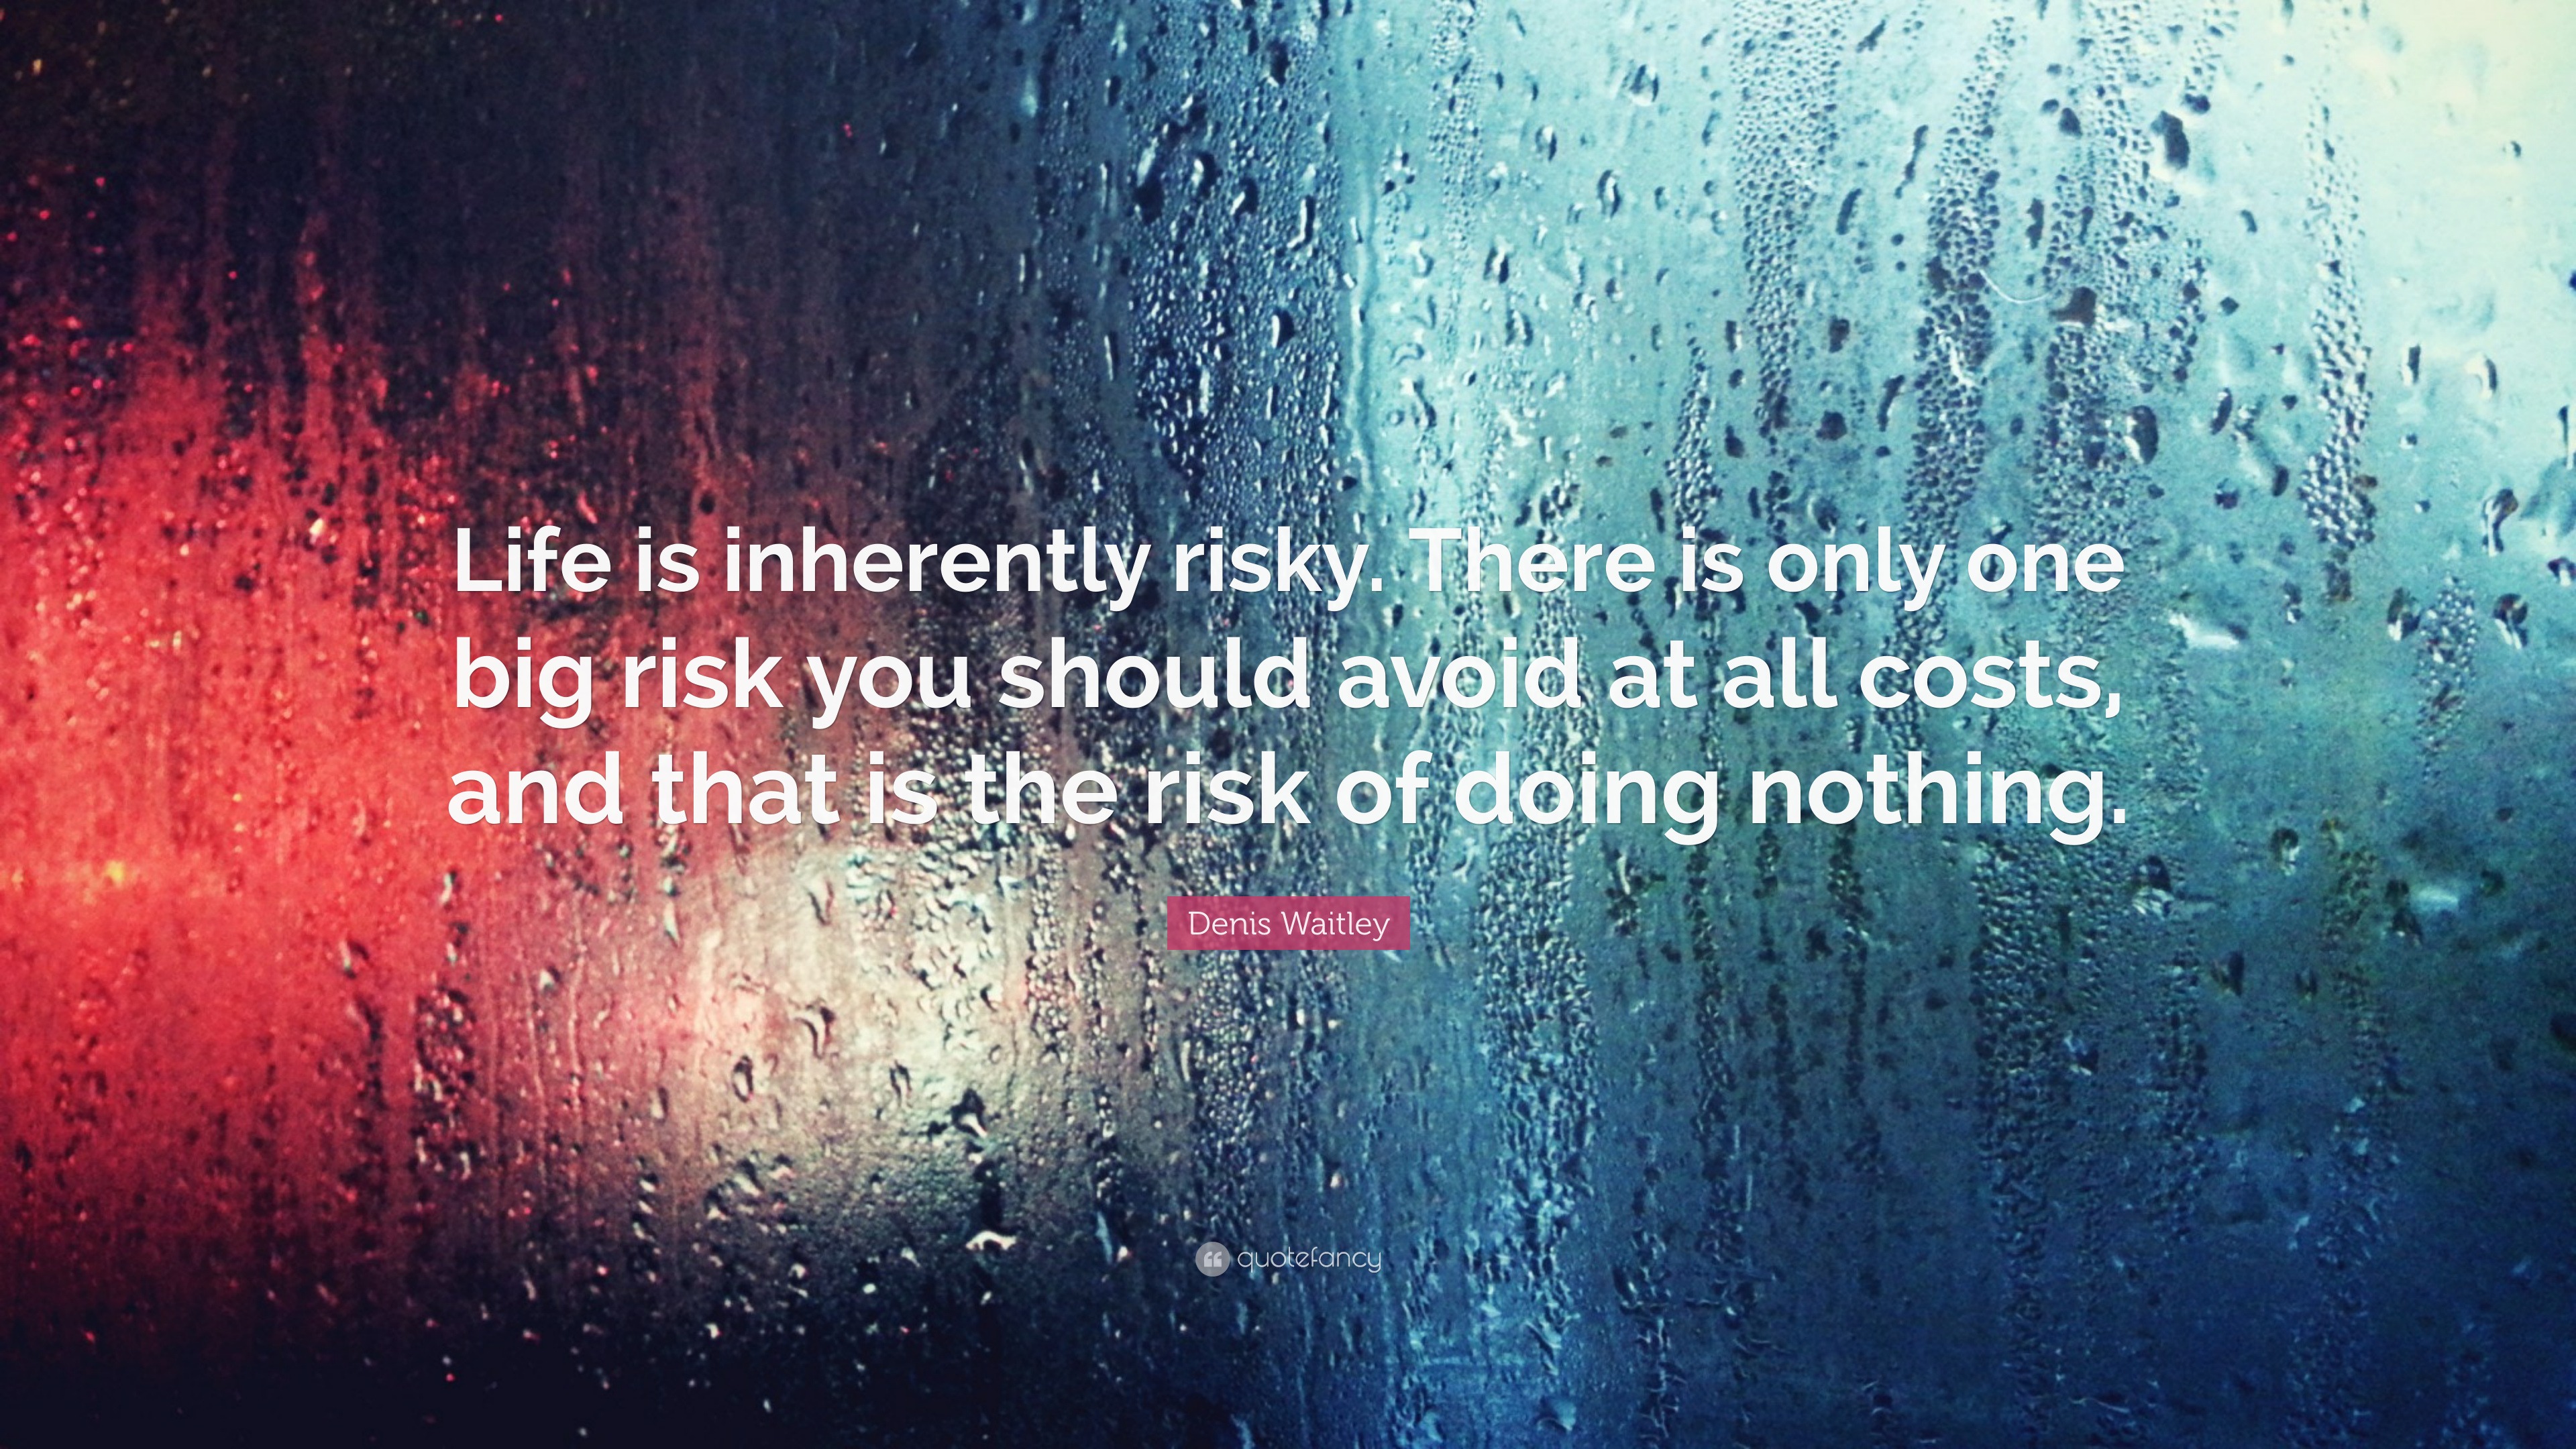 Denis Waitley Quote: “Life is inherently risky. There is only one big ...